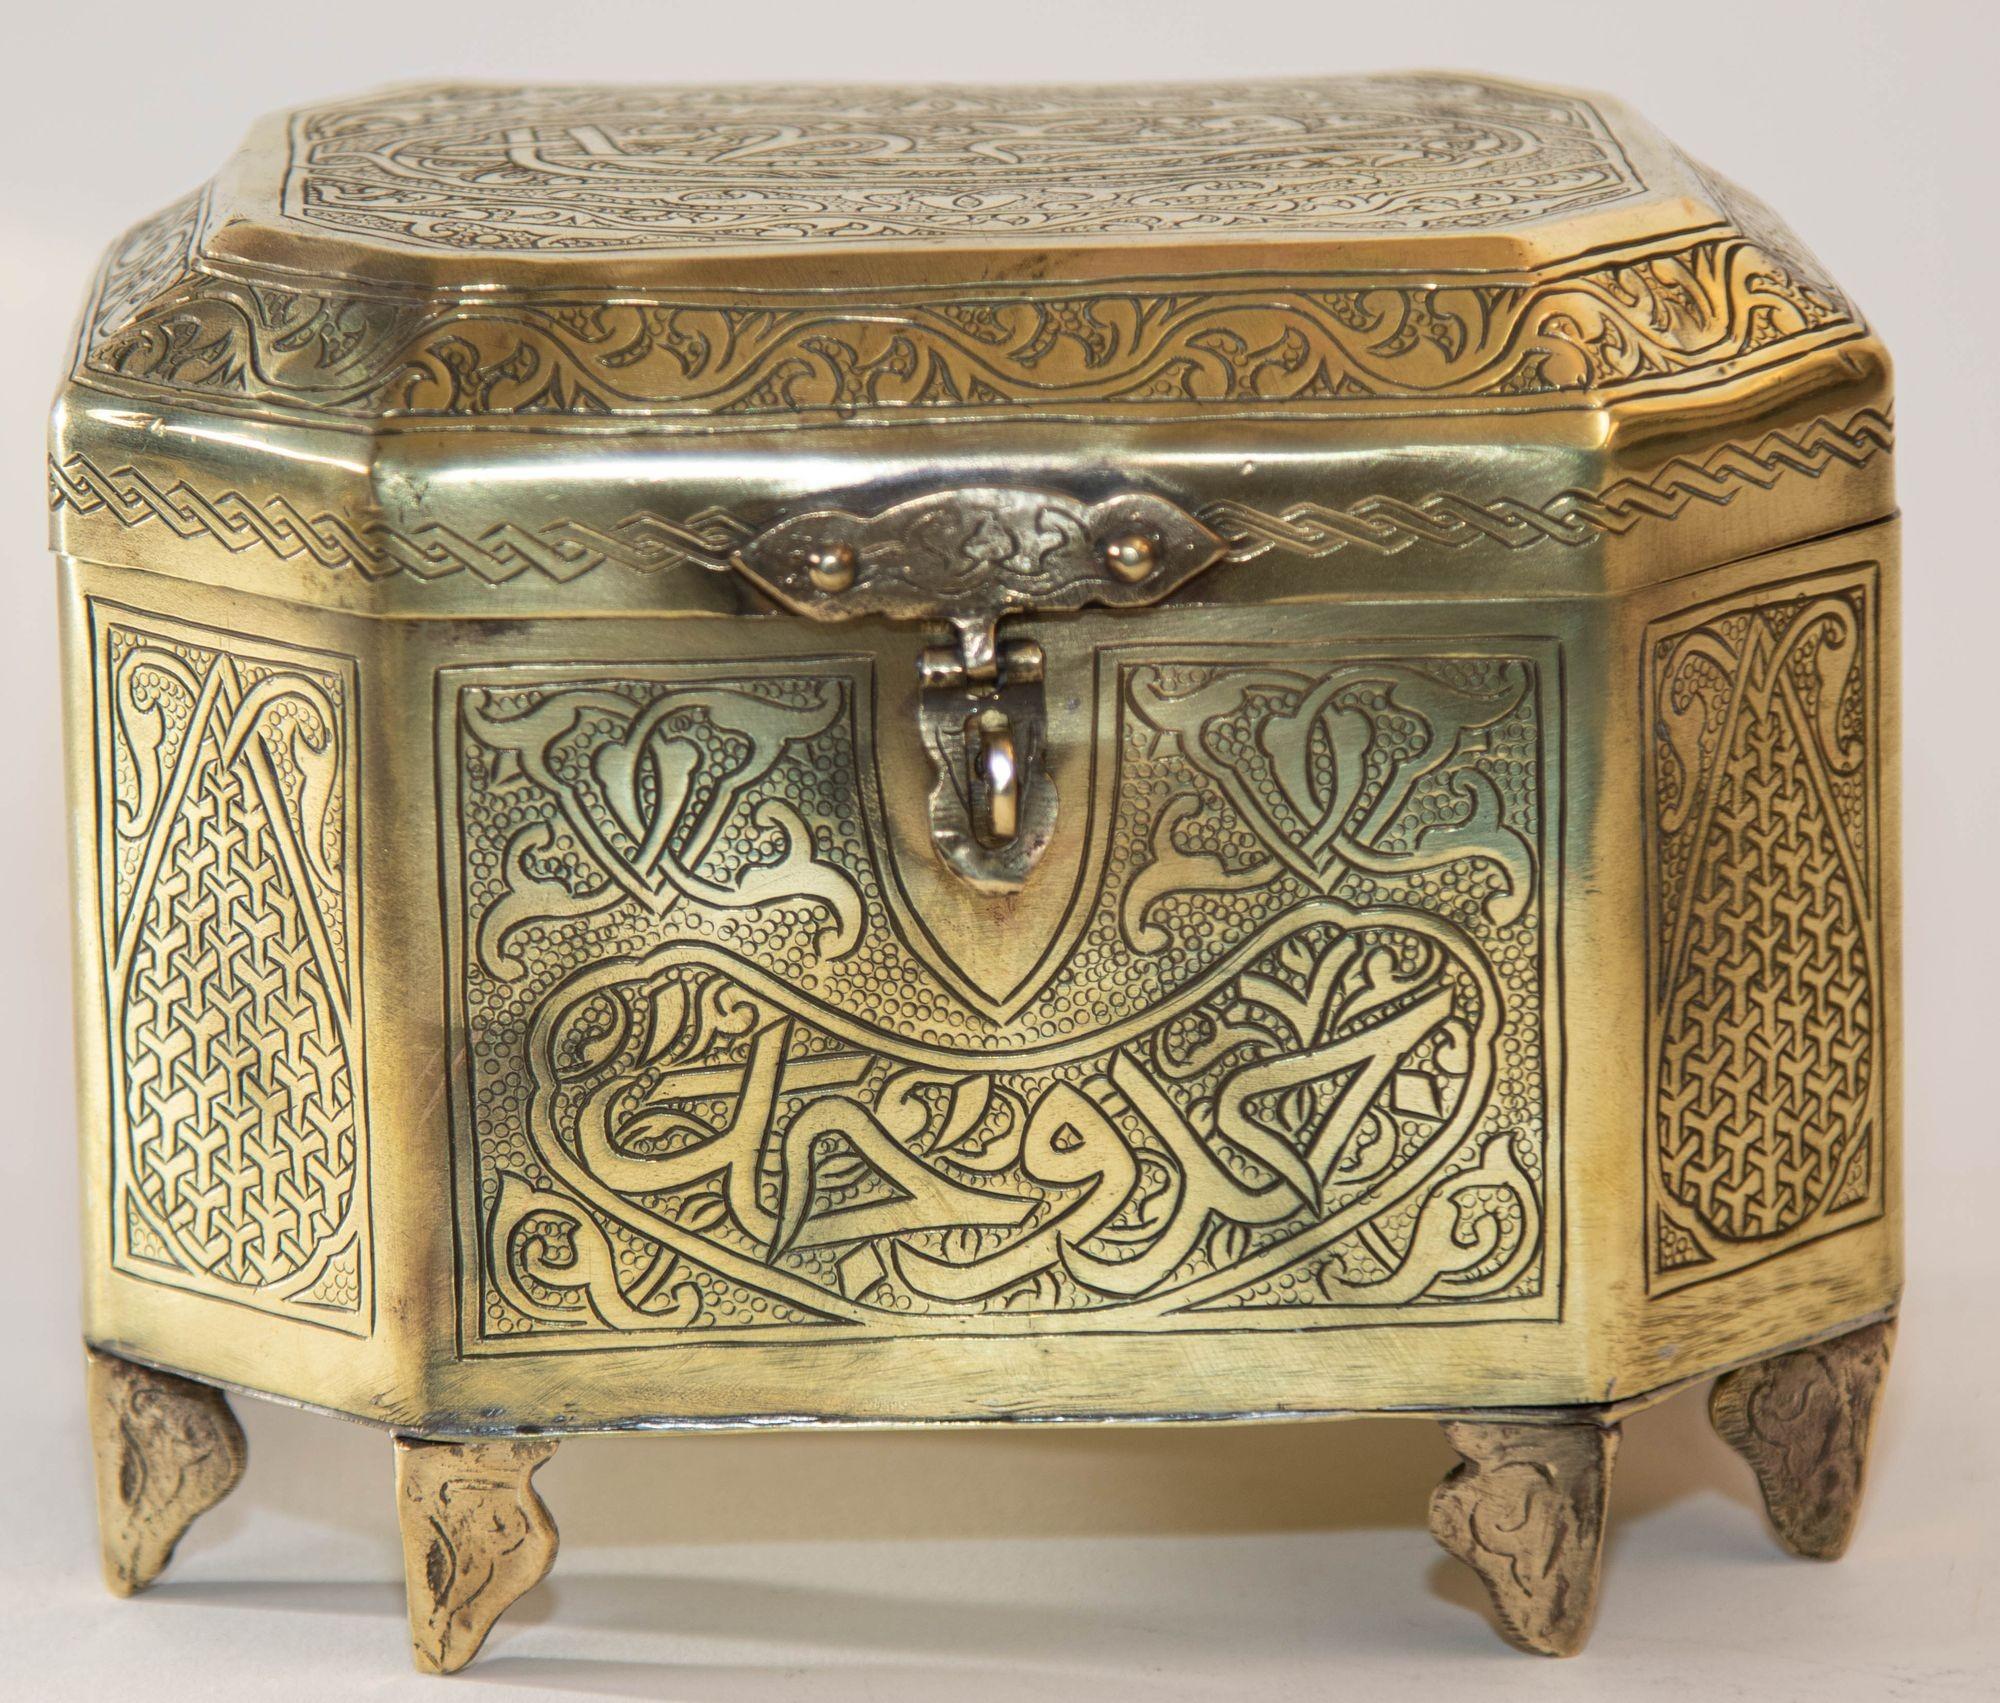 Antique Persian Islamic Brass Jewelry Footed Box in Mamluk Revival Damascene style.
A Middle Eastern Moorish Damascene Brass Box circa 1910-1920s.
A fine antique handcrafted etched hammered Syrian Damascene brass jewelry box.
Octagonal shape lidded